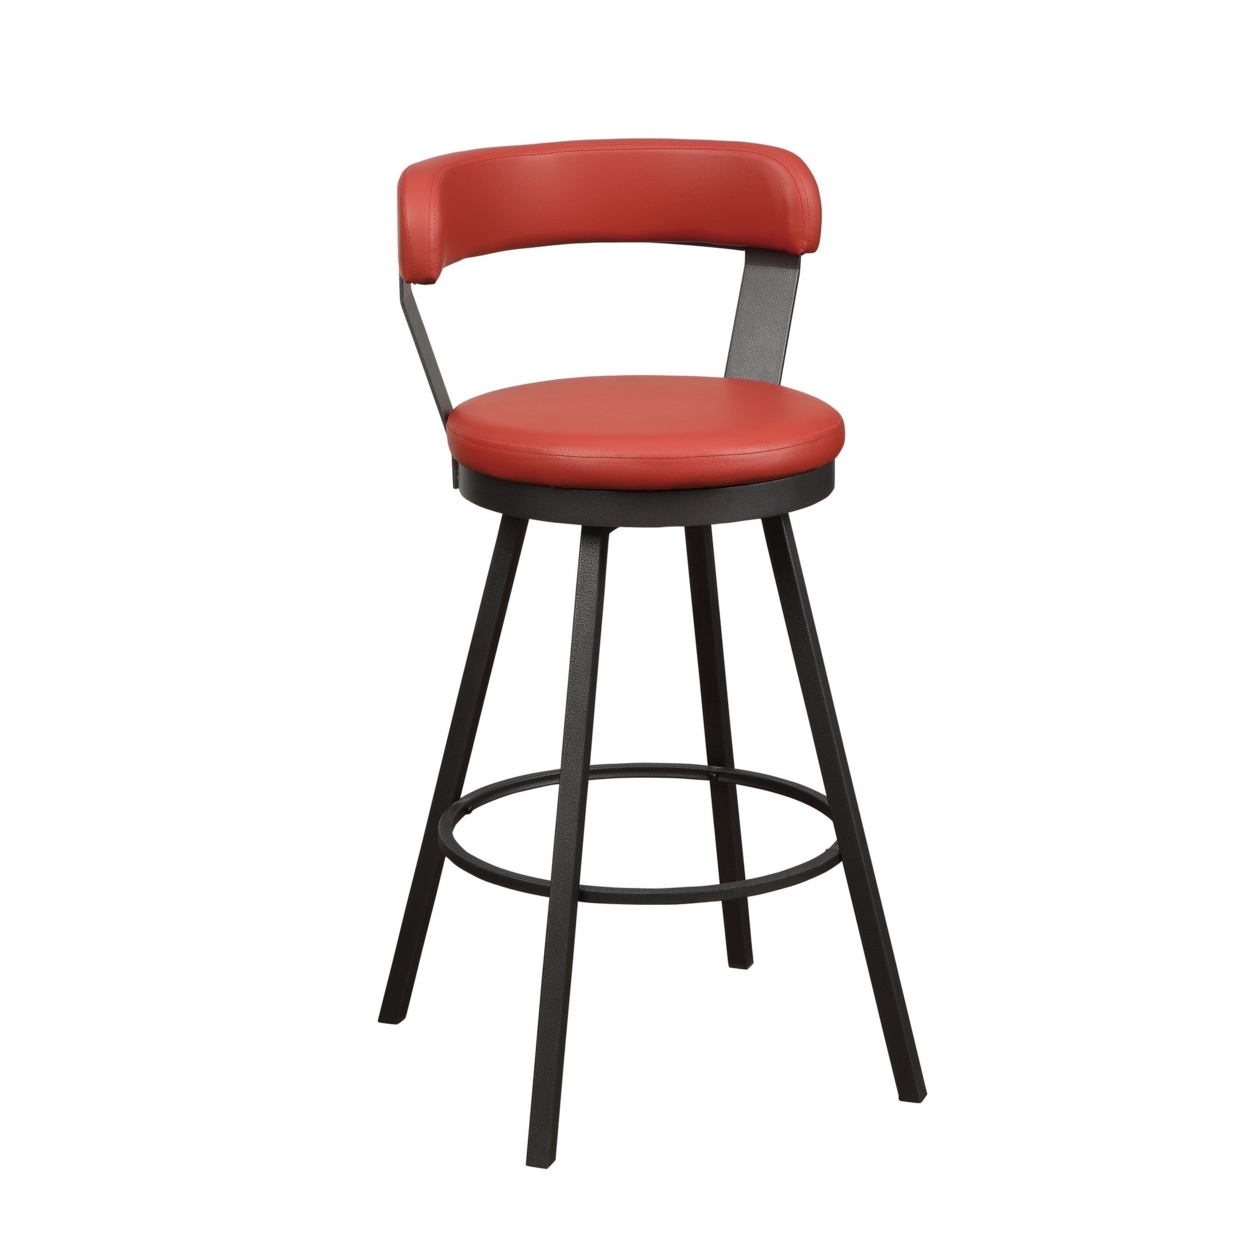 Leatherette Pub Chair With Curved Design Open Backrest, Set Of 2, Red- Saltoro Sherpi